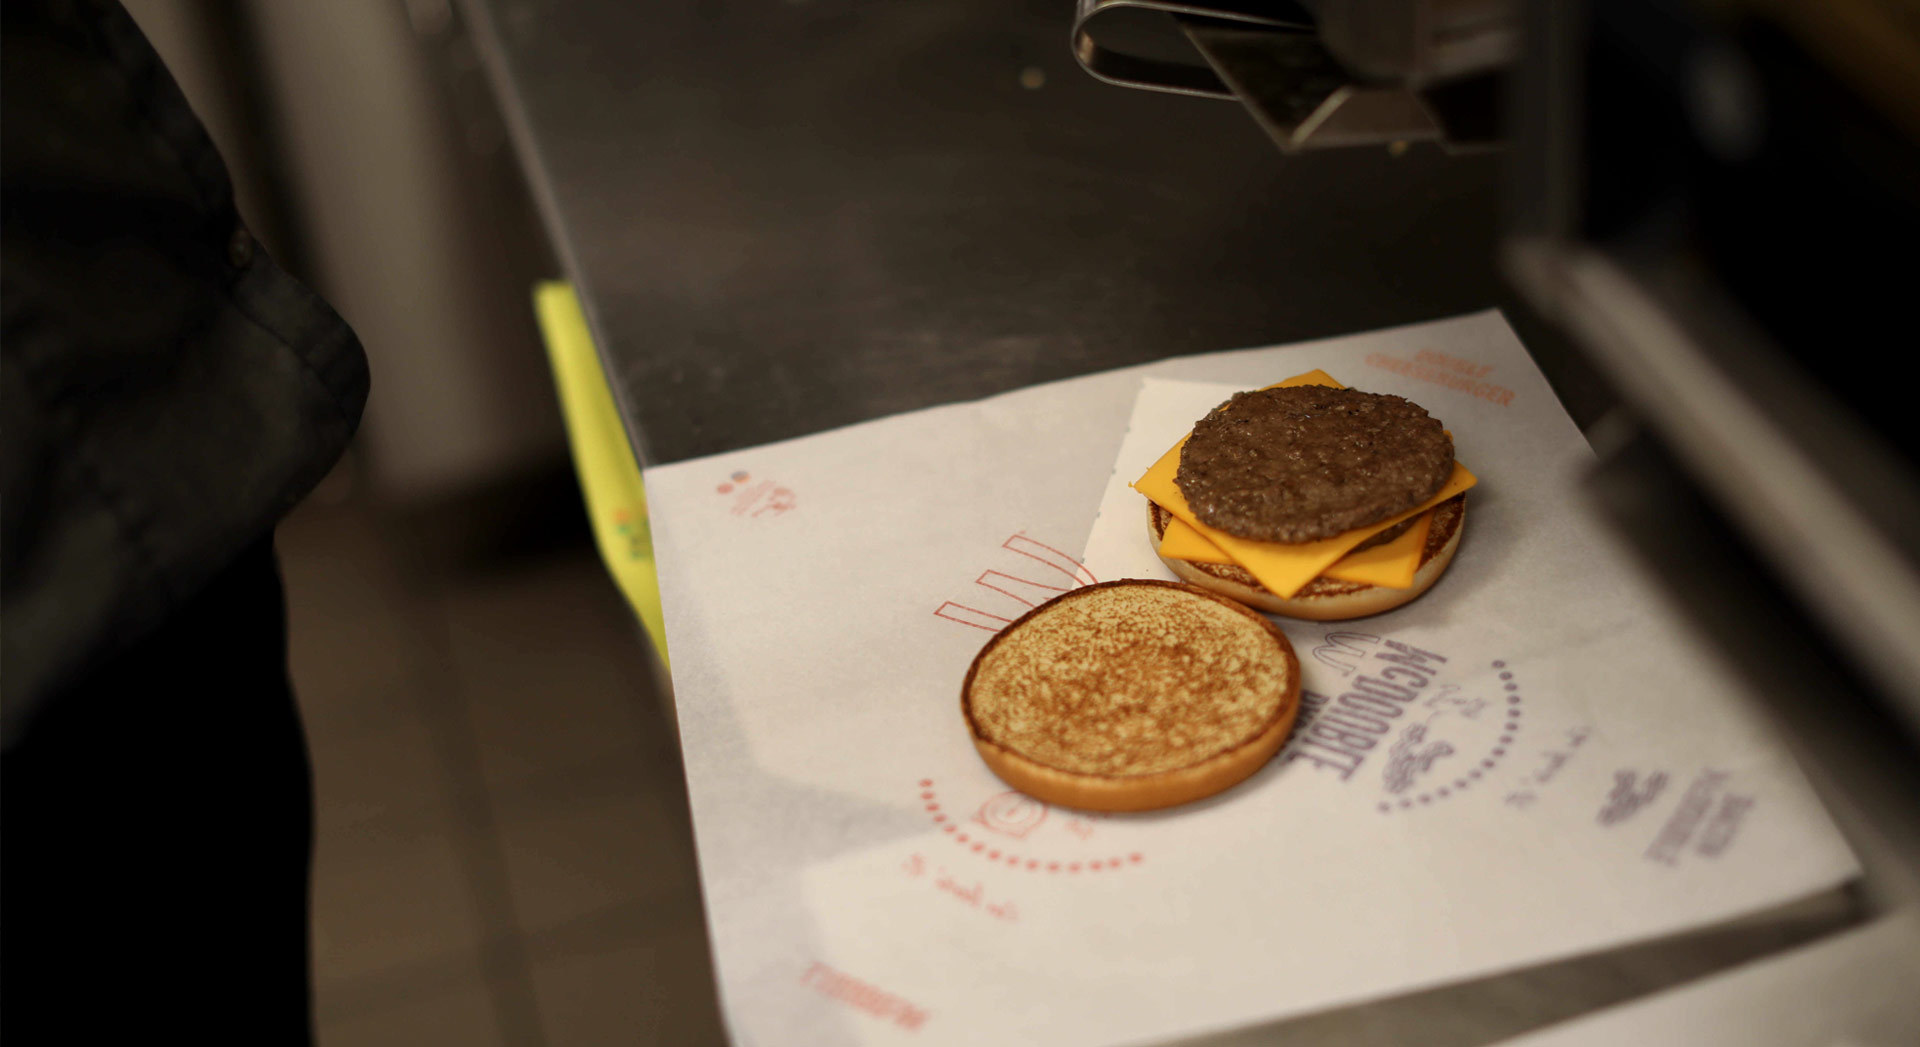 Know Our Food - Are McDonald's burgers grilled?